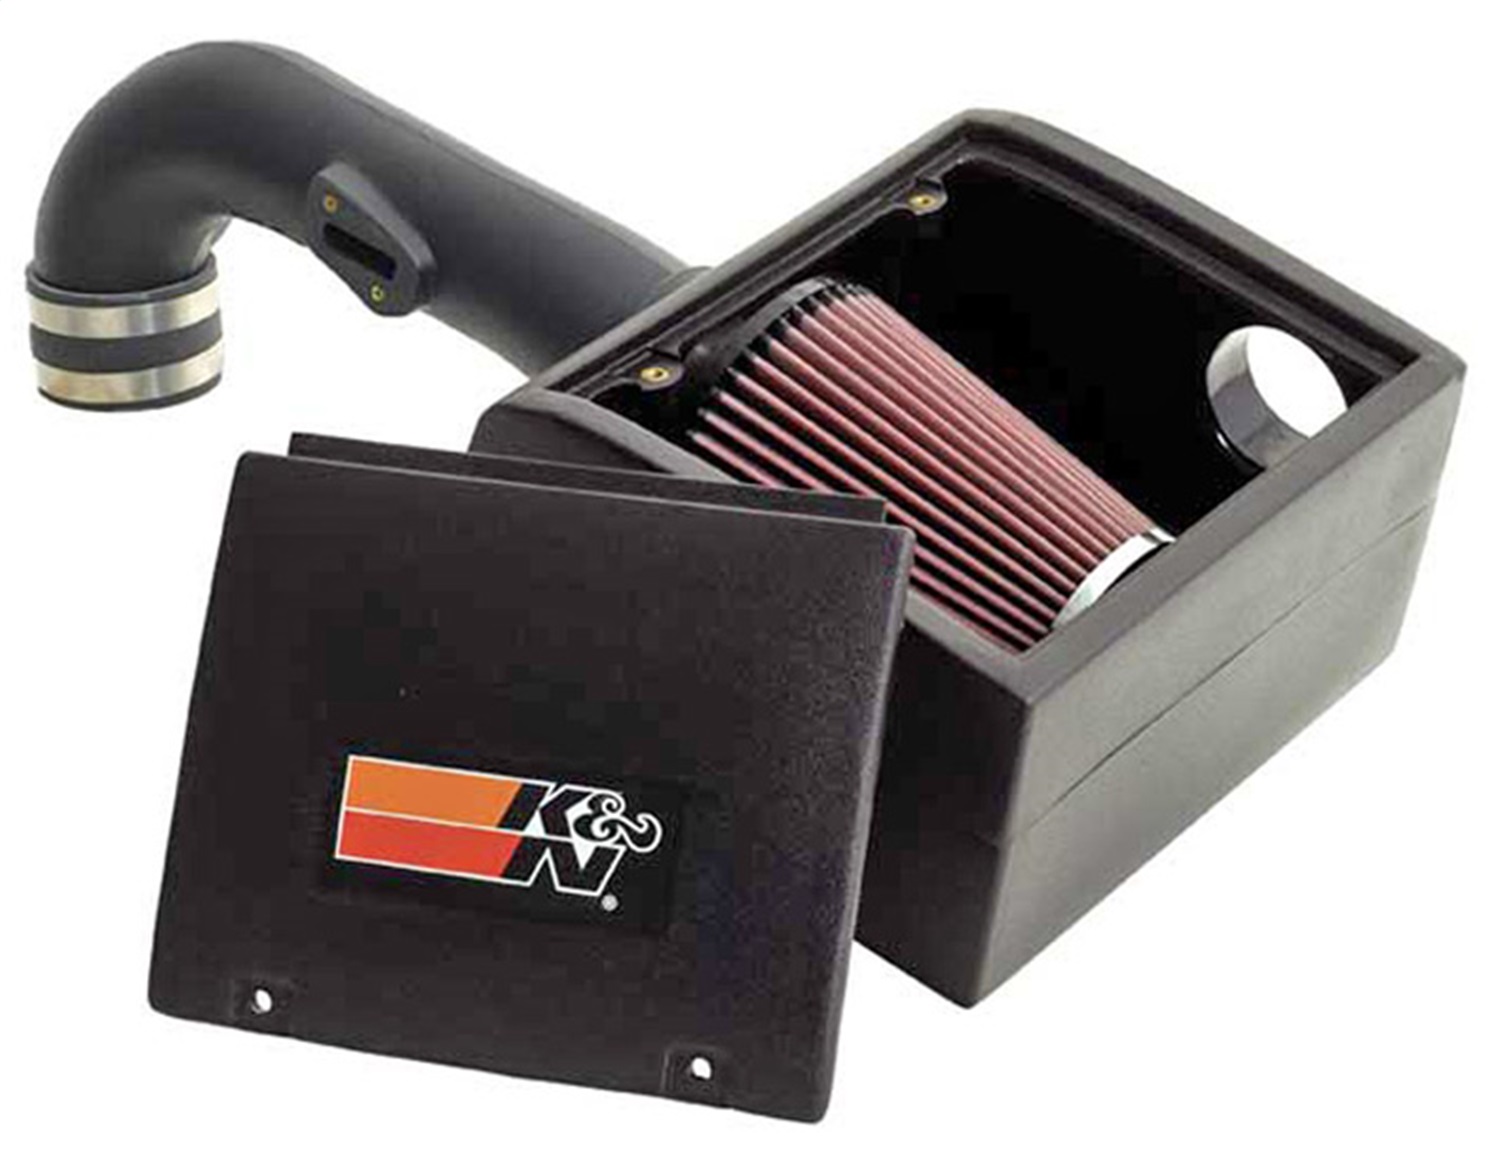 K&N Filters K&N Filters 57-3056 Filtercharger Injection Performance Kit Fits 06-10 HHR